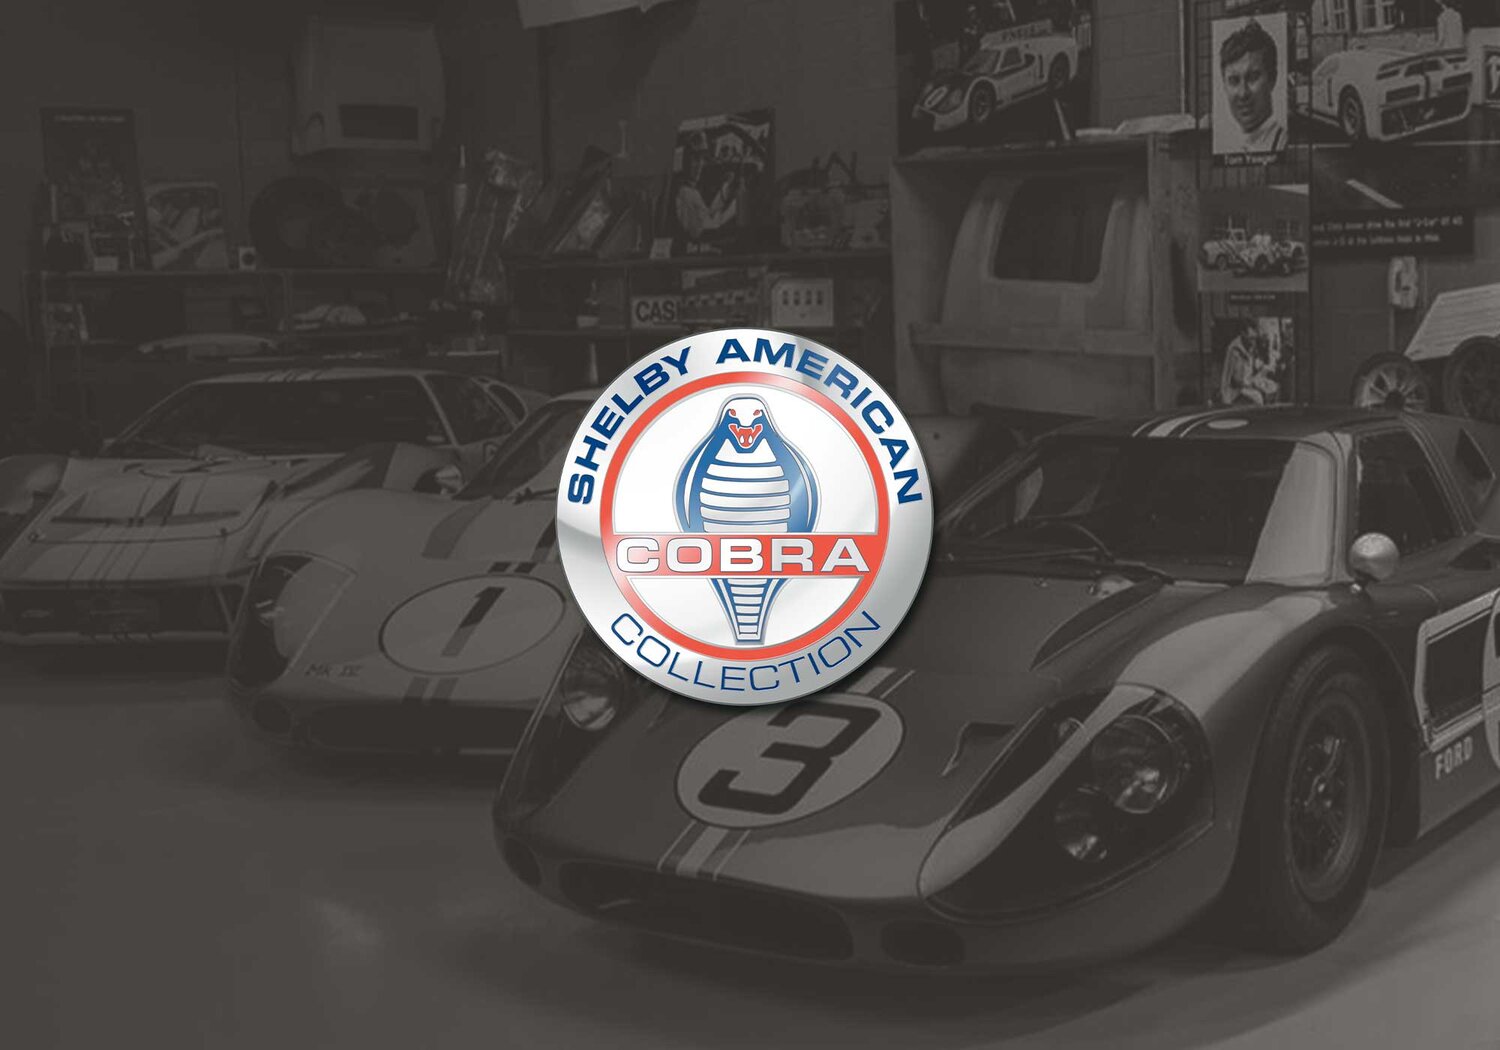 www.shelbyamericancollection.org